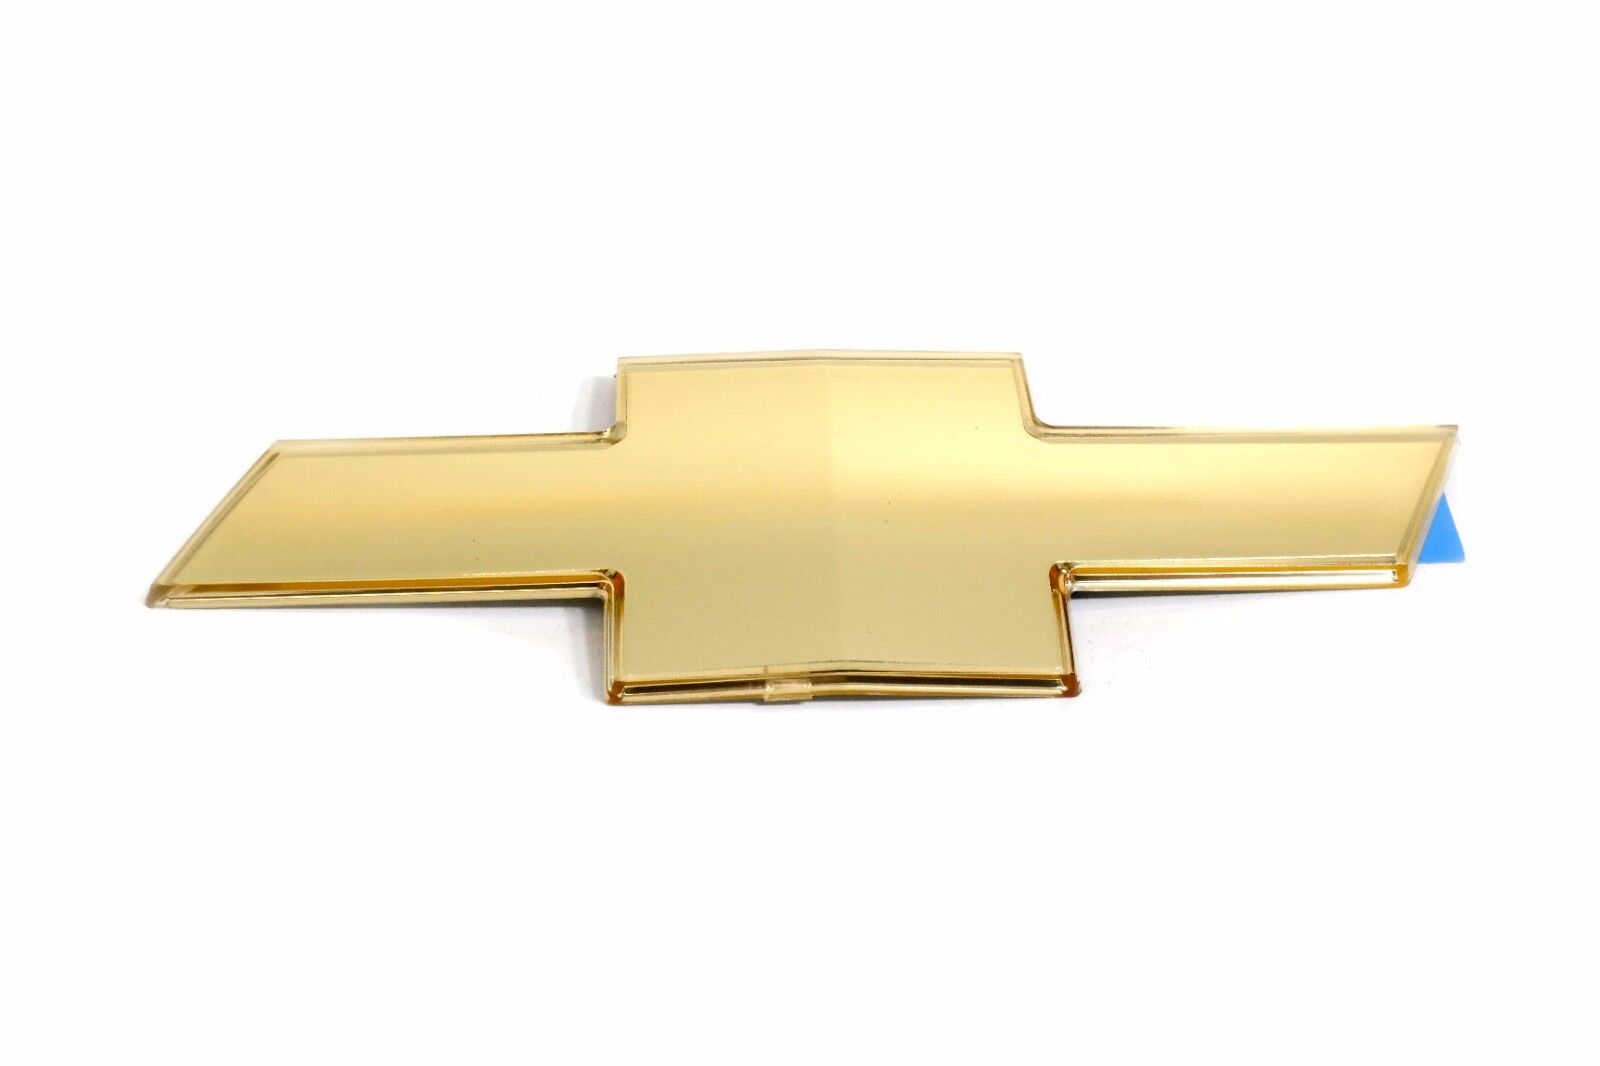 2005 Chevrolet Equinox Front Grille Bow tie Emblem Badge Gold OEM NEW